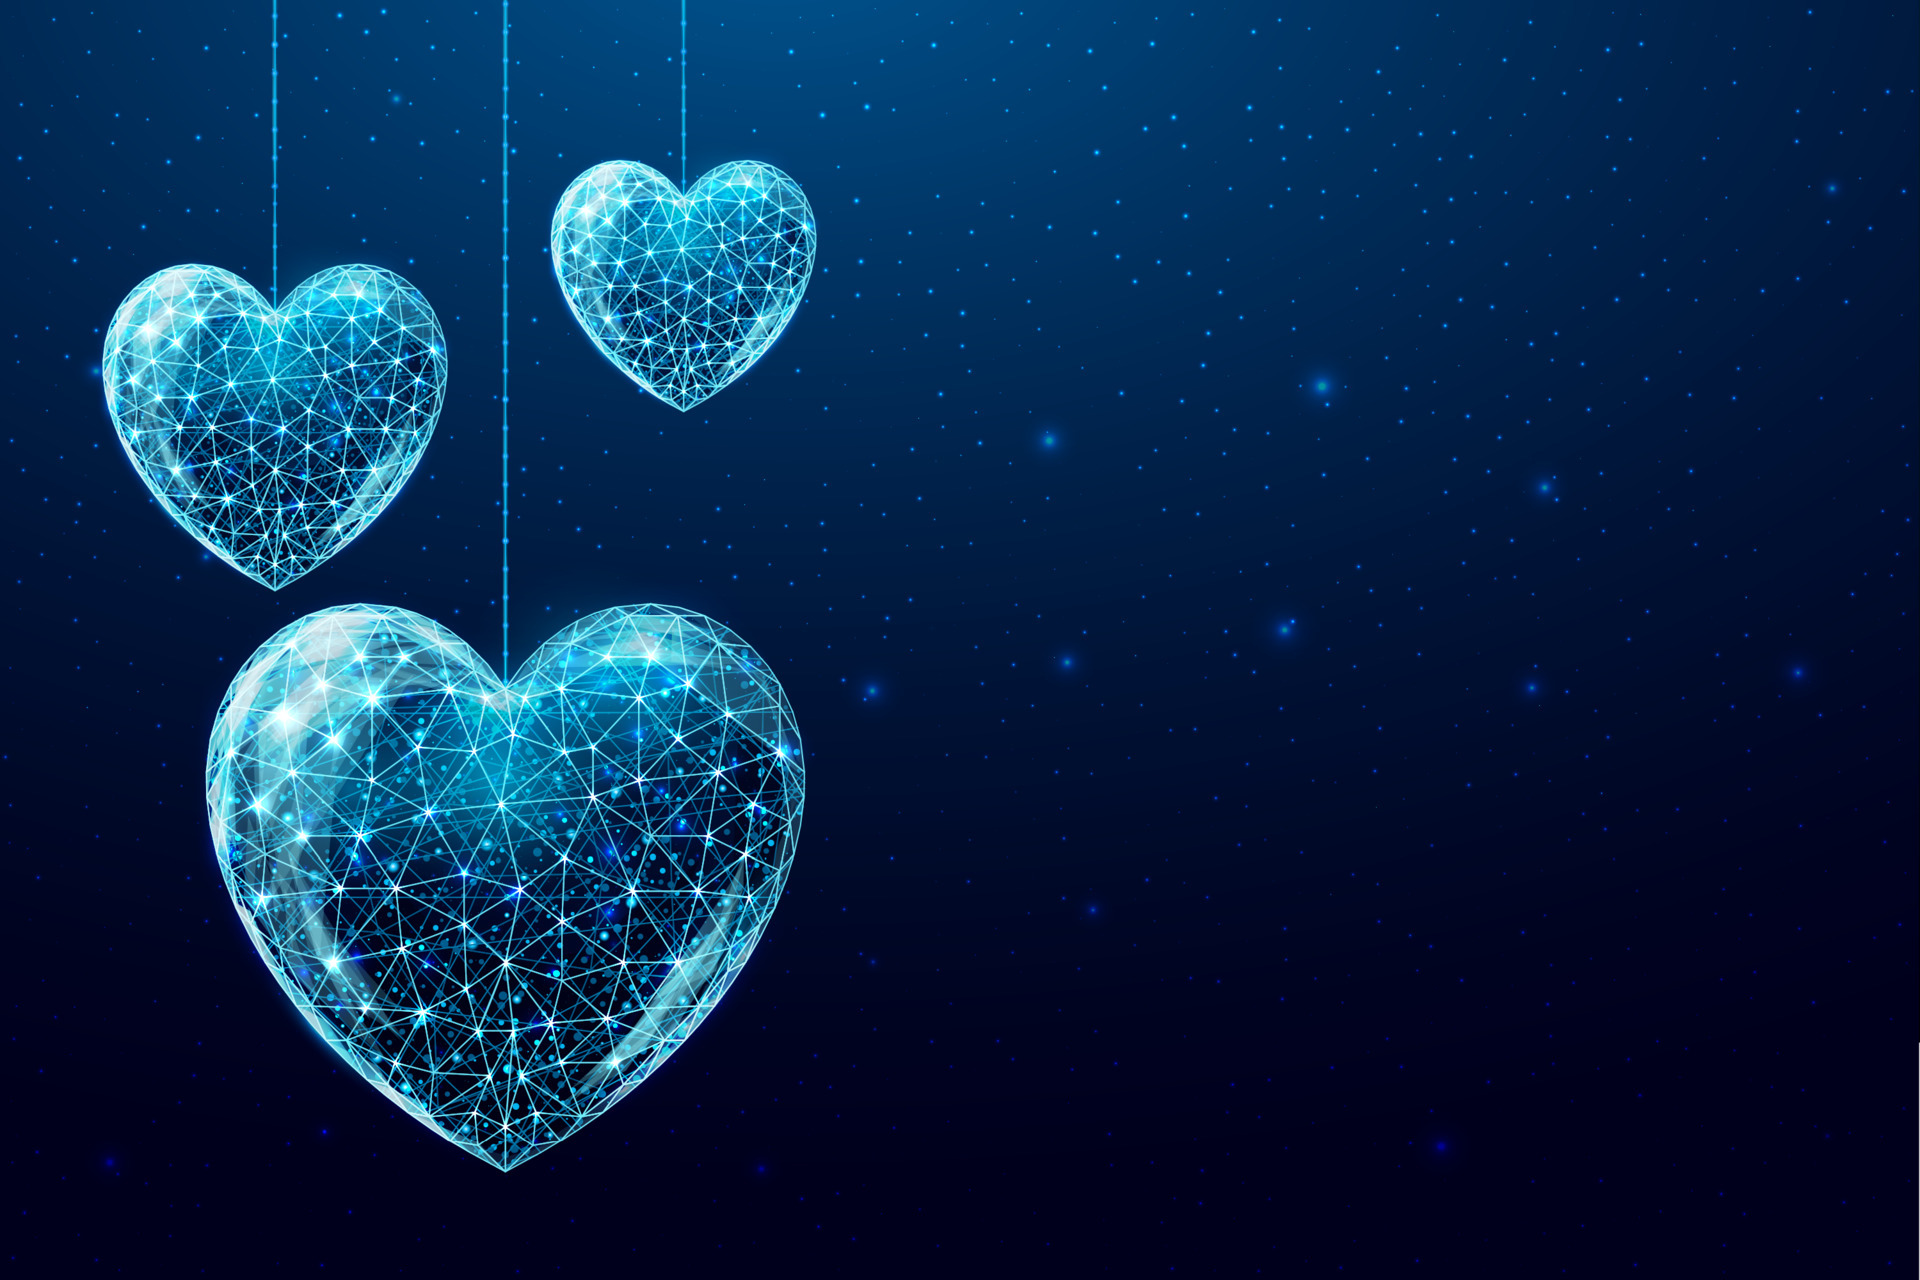 Blue Aesthetic Heart Wallpapers  Wallpaper Cave